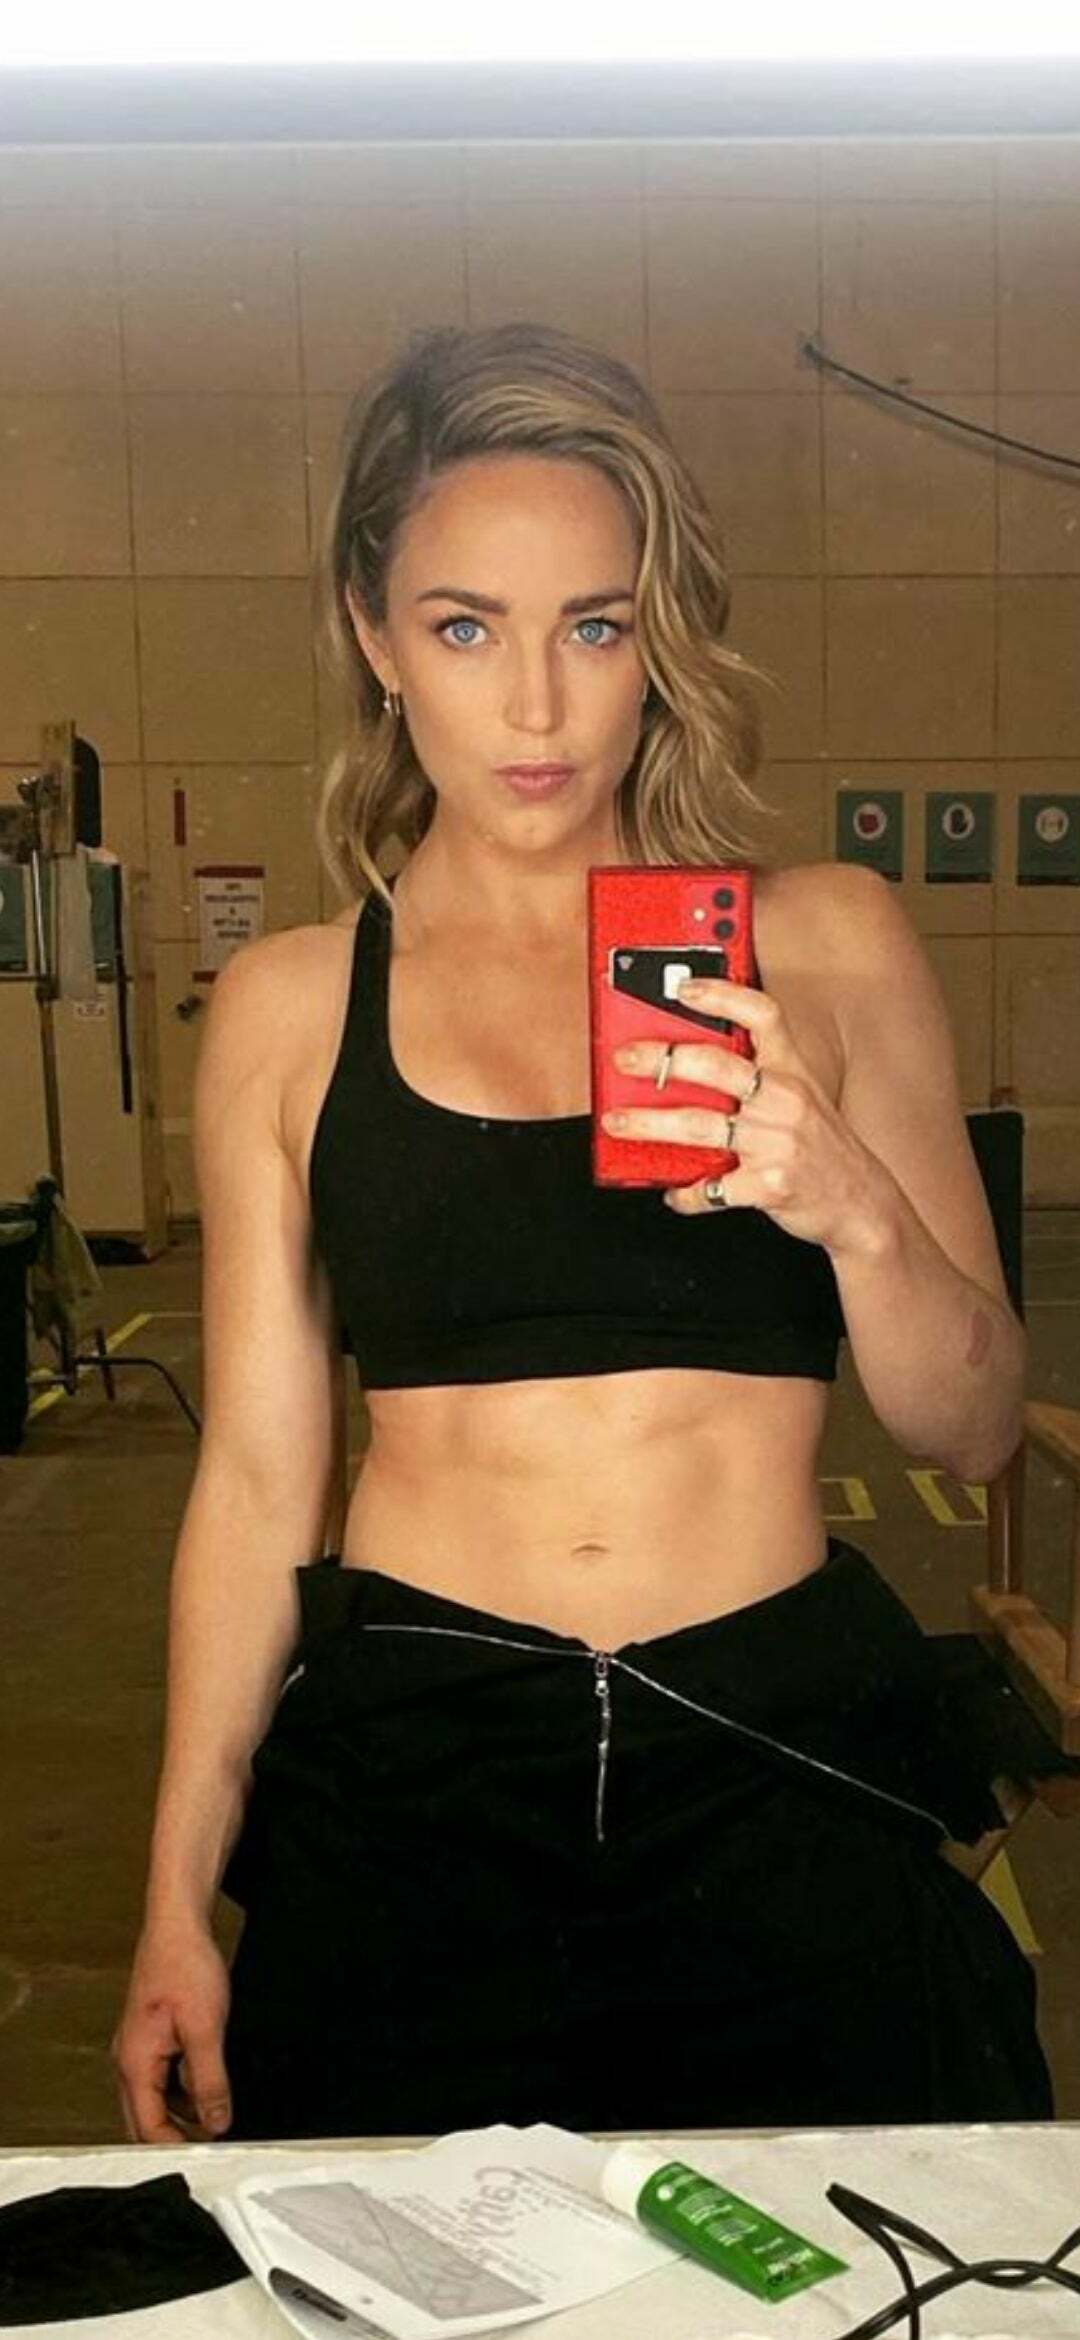 Need to get off to tight abs like Caity Lotz's with a bud